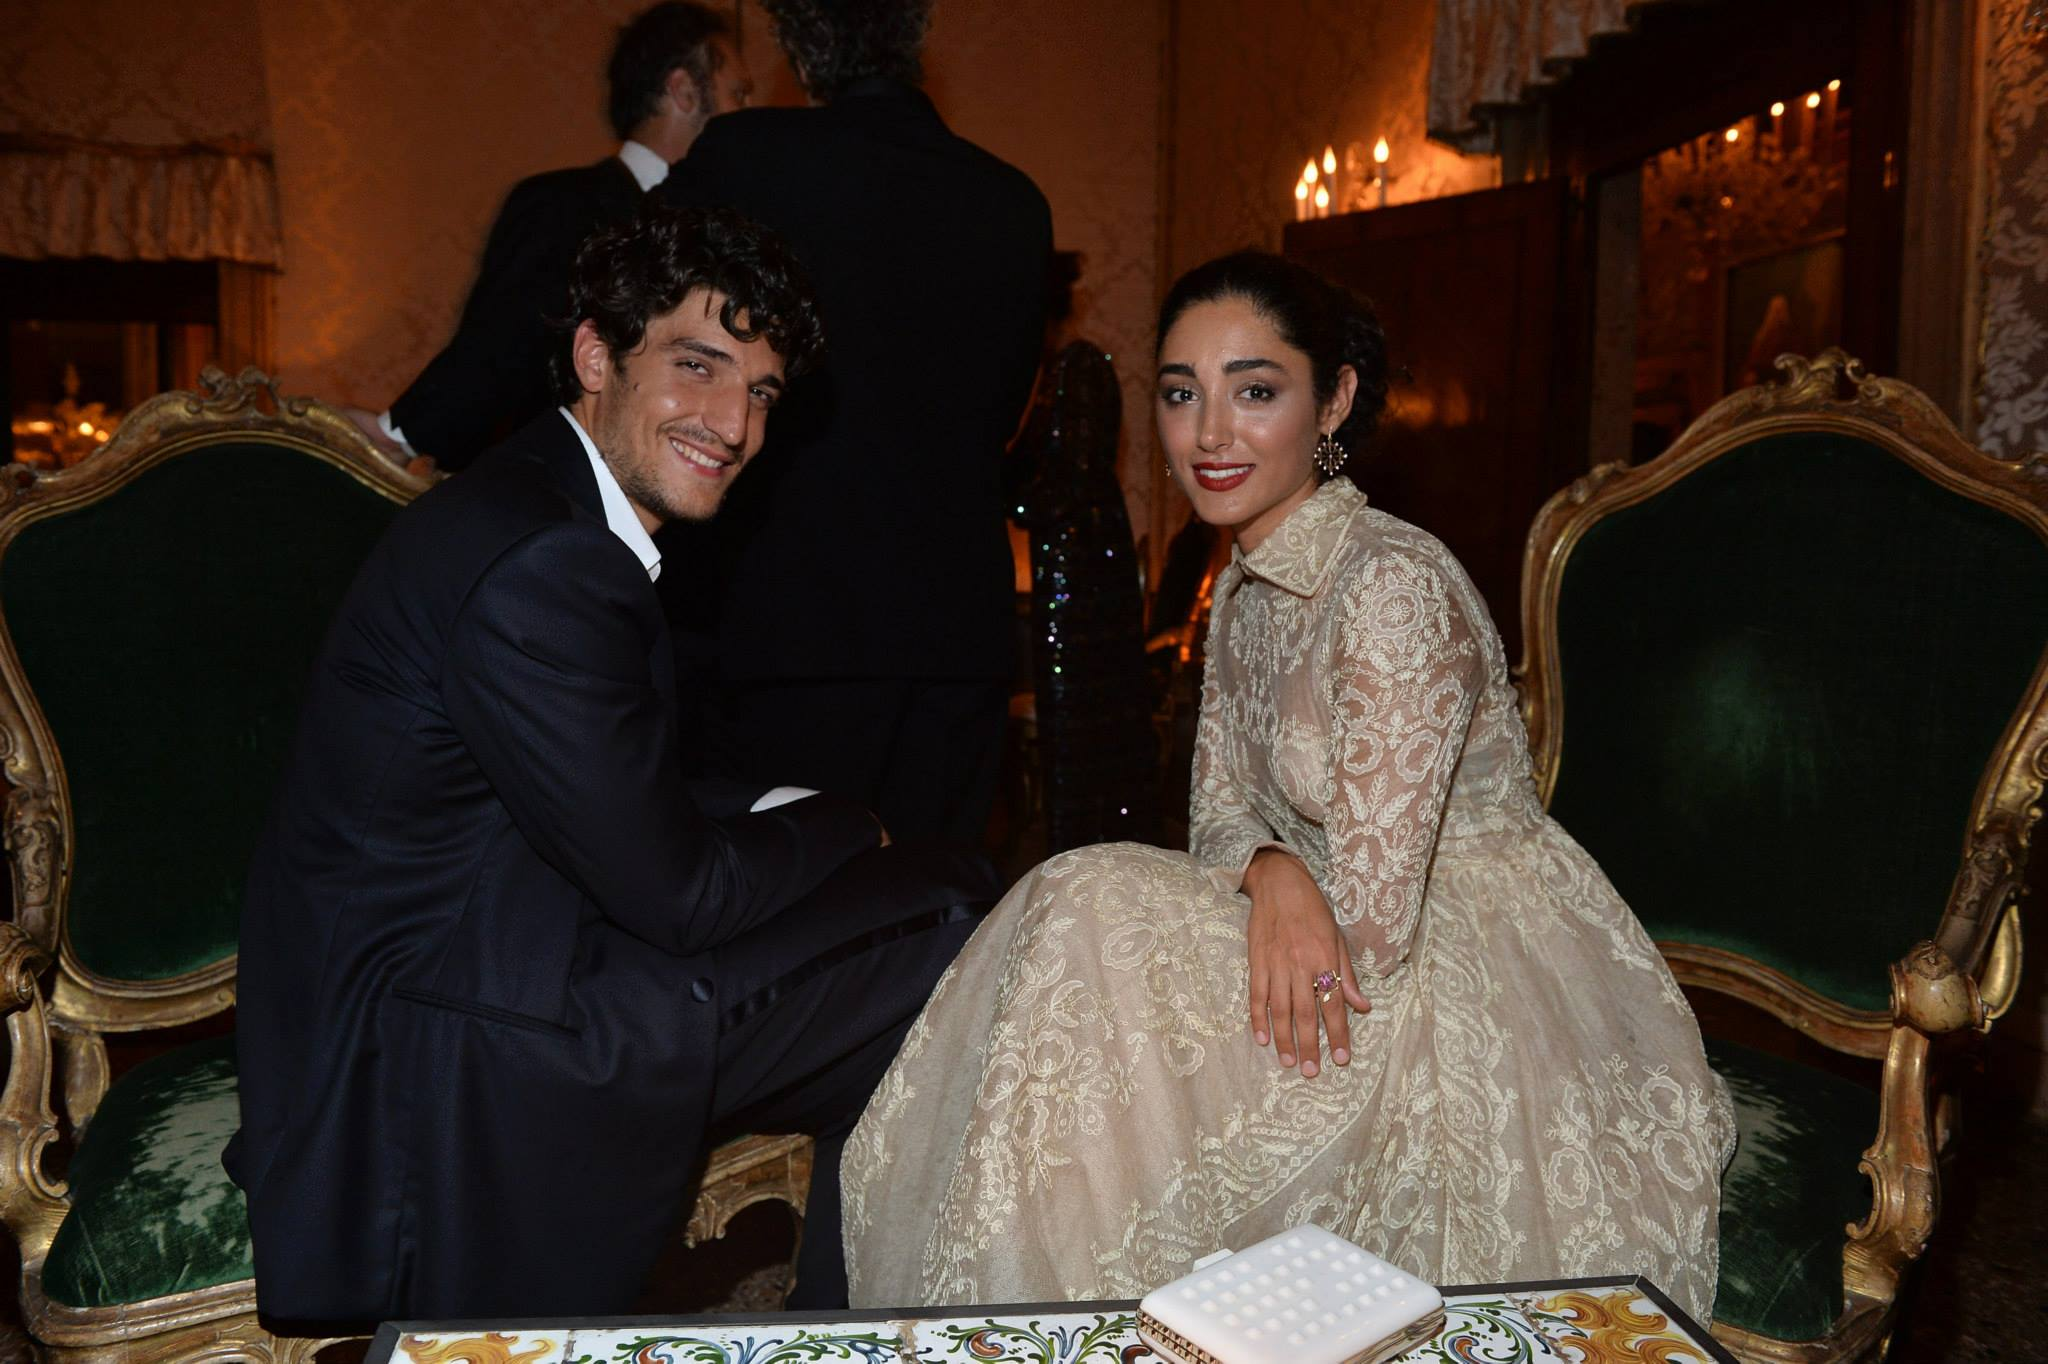 Louis Garrel and Golshifteh Farahani were never actually married